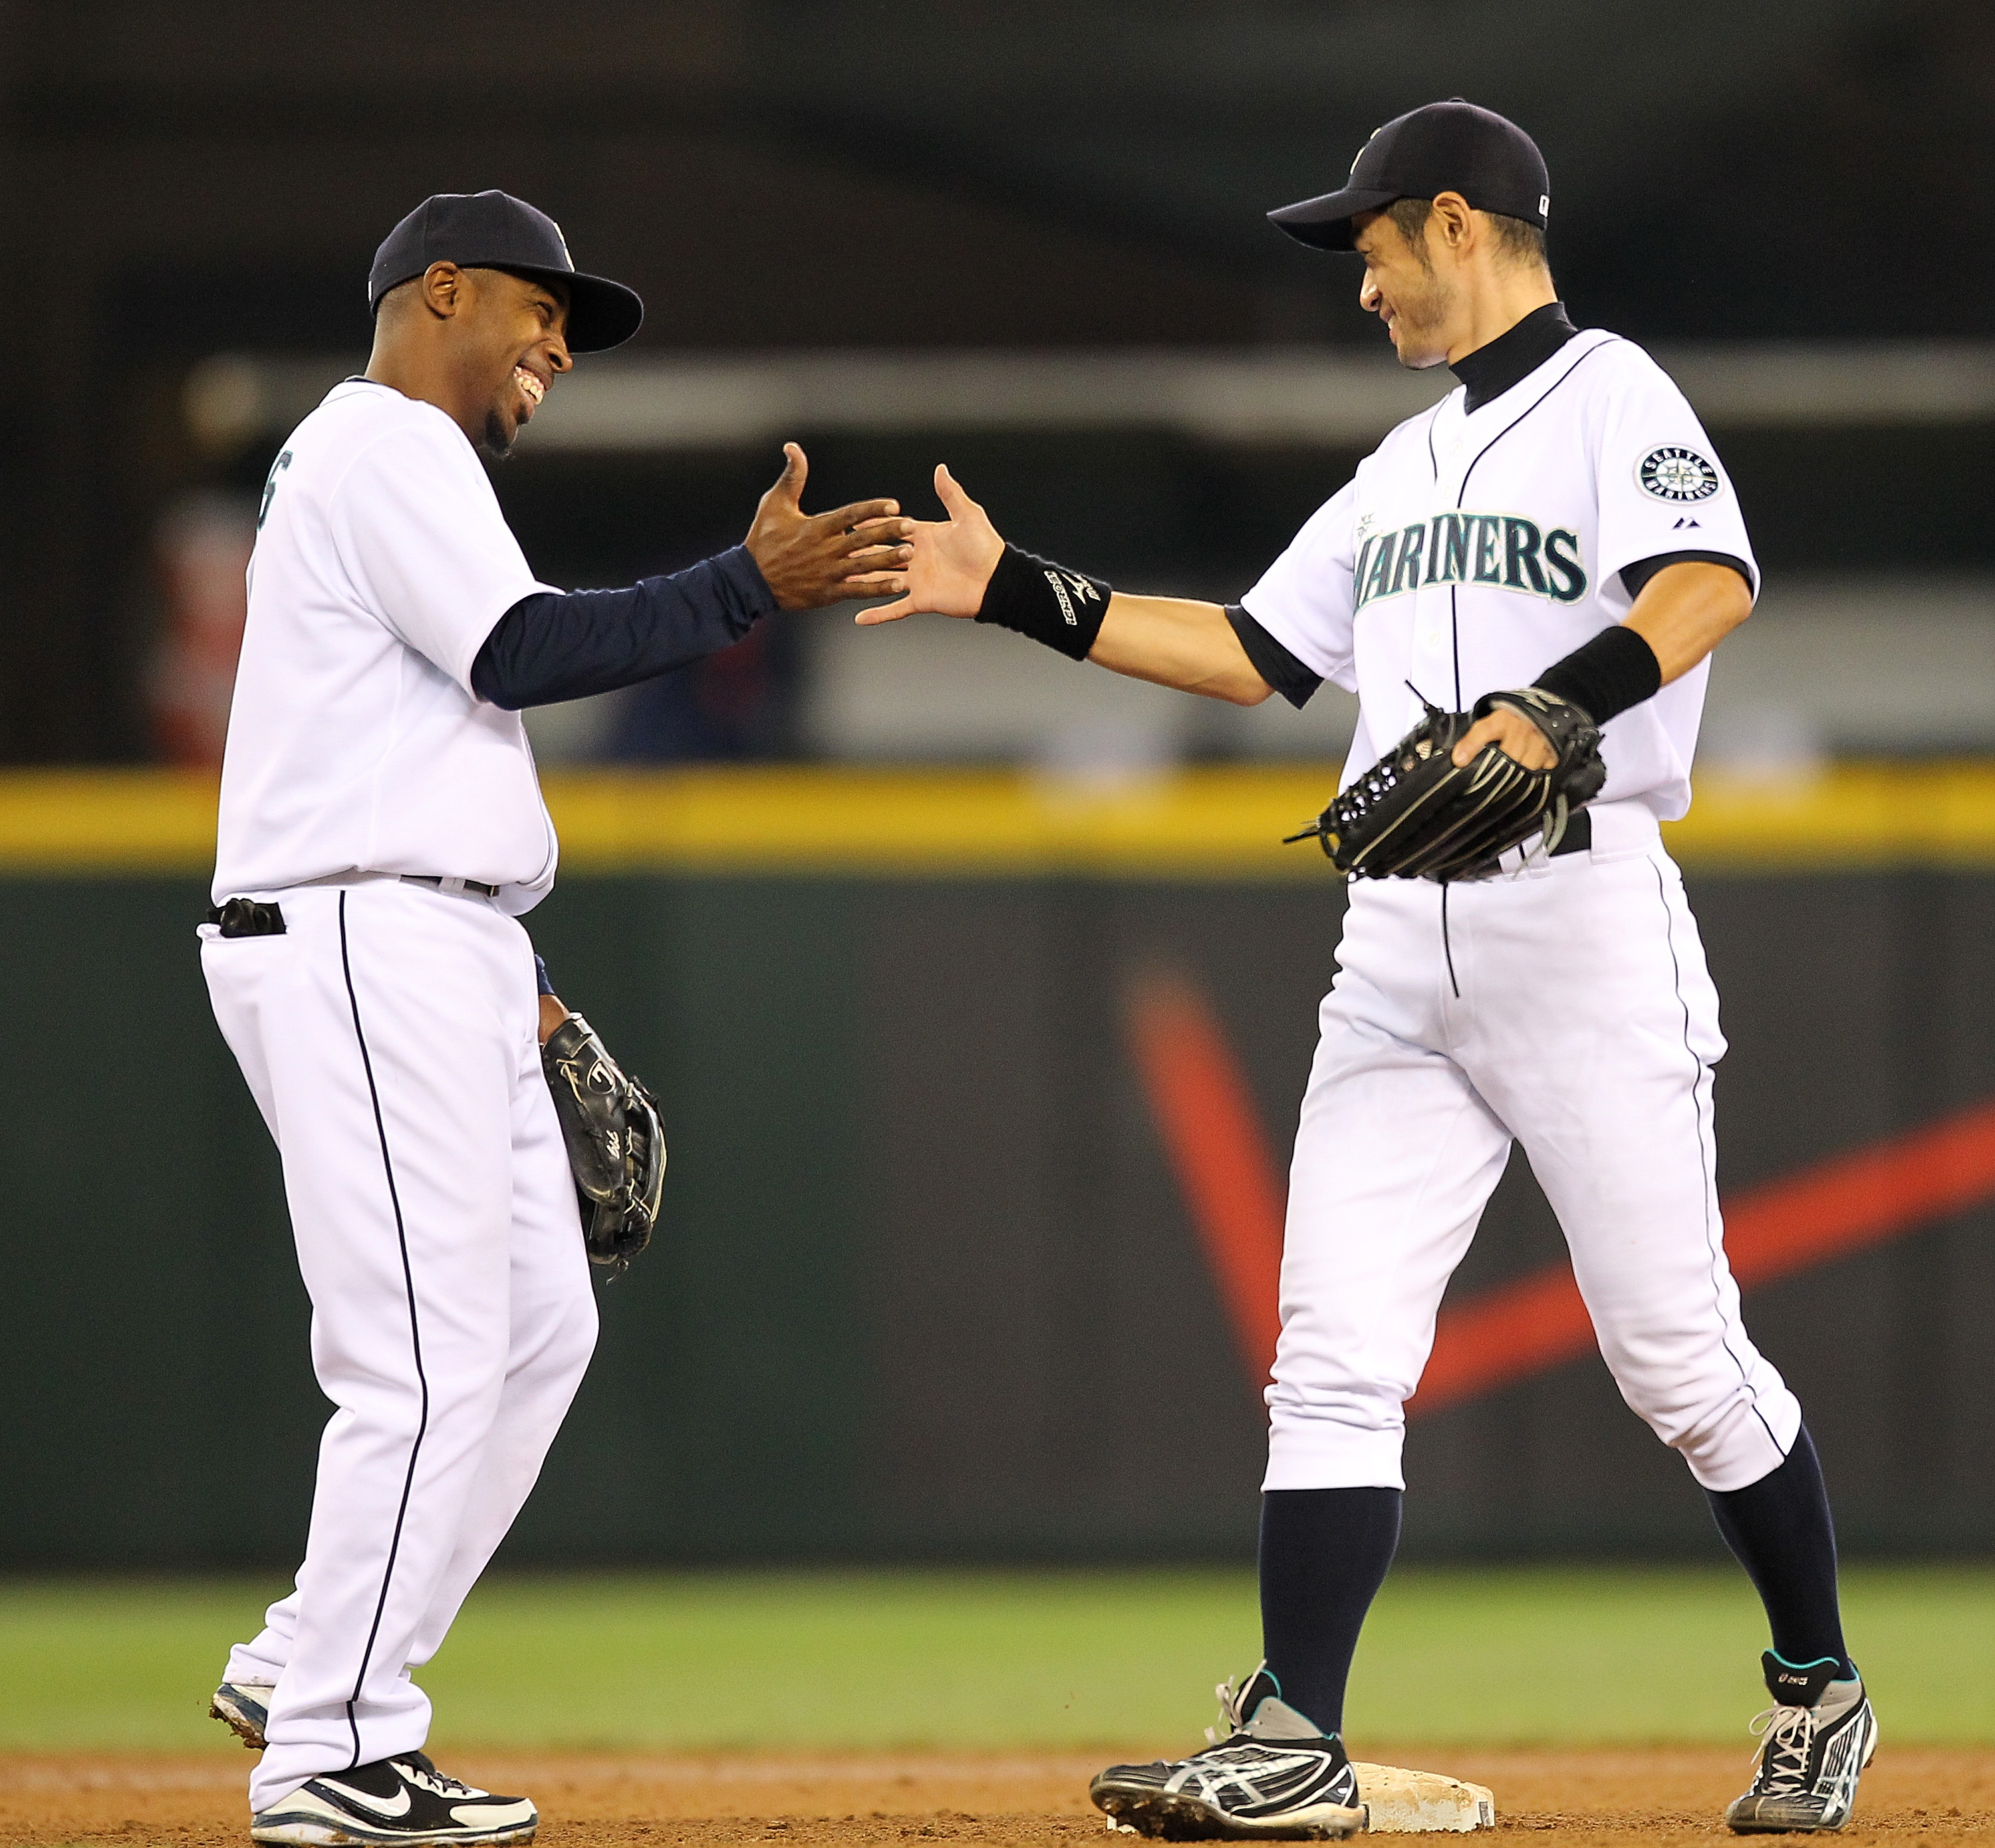 SEATTLE - MAY 26:  Ichiro Suzuki #51 (R) of the Seattle Mariners celebrates with Chone Figgins #9 after defeating the Detroit Tigers 5-4 at Safeco Field on May 26, 2010 in Seattle, Washington. (Photo by Otto Greule Jr/Getty Images)